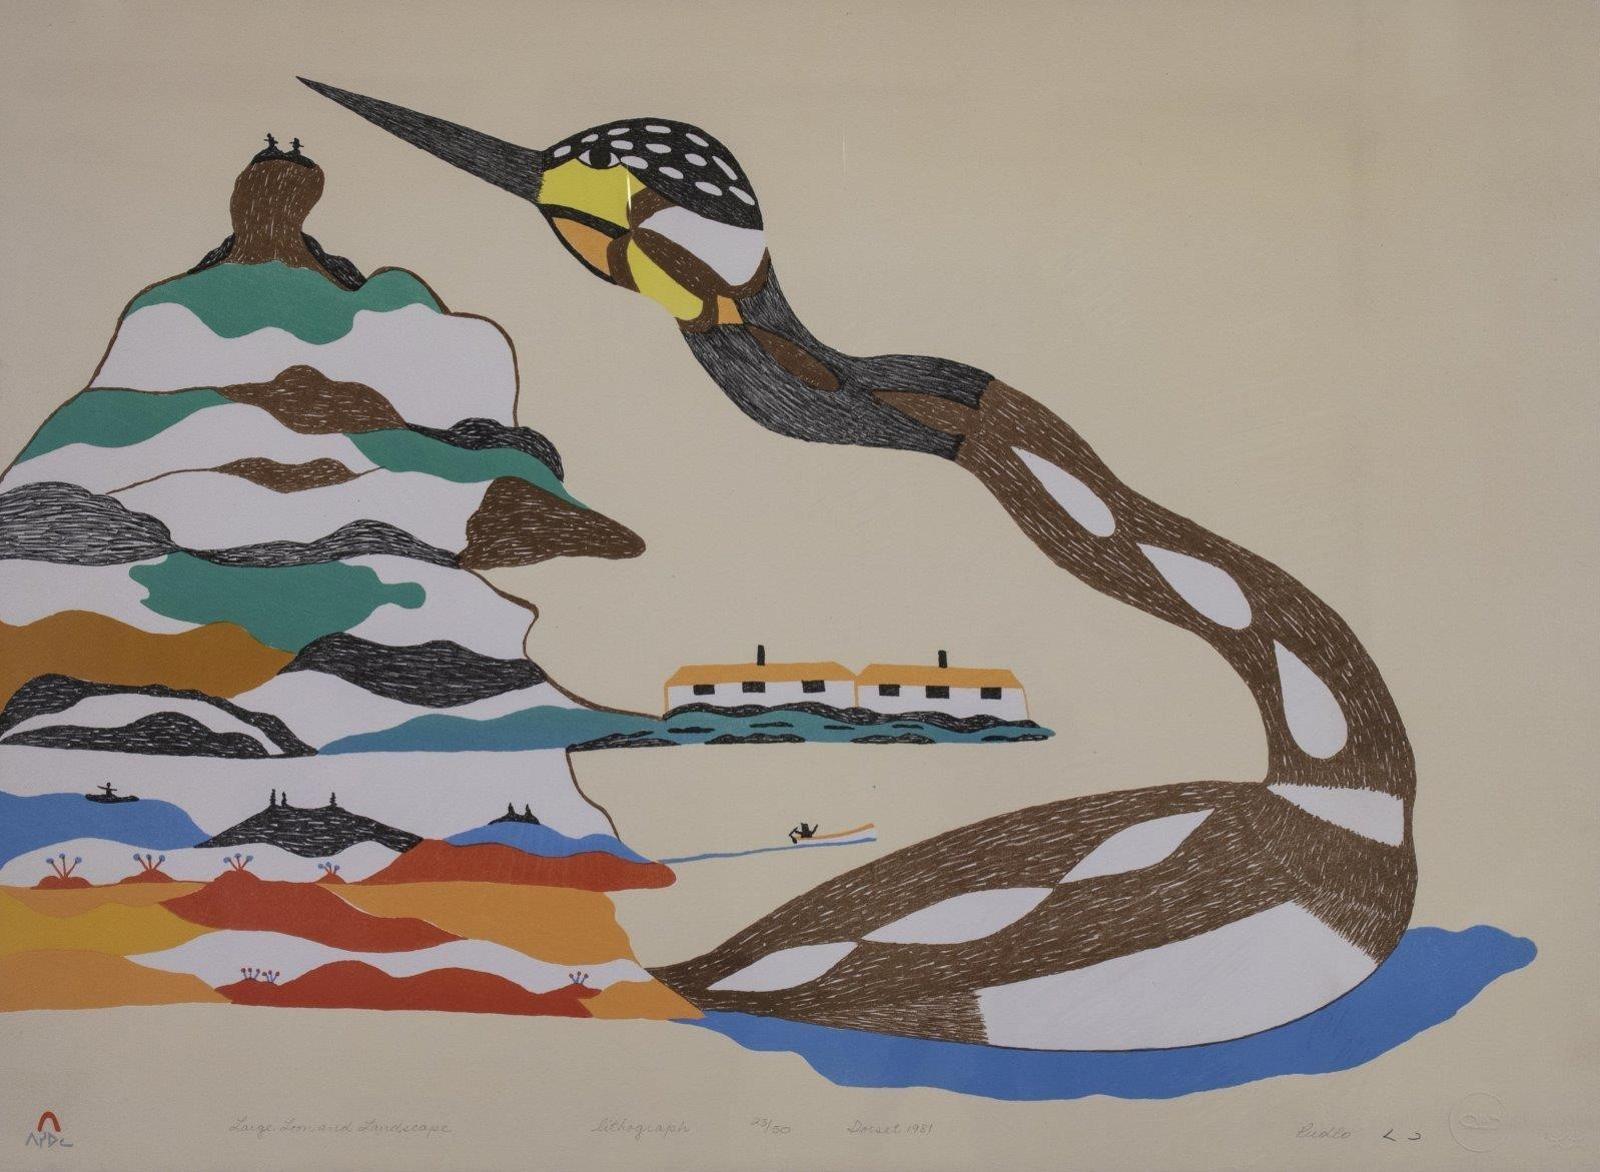 Pudlo Pudlat (1916-1992) - Large Loon And Landscape; 1981